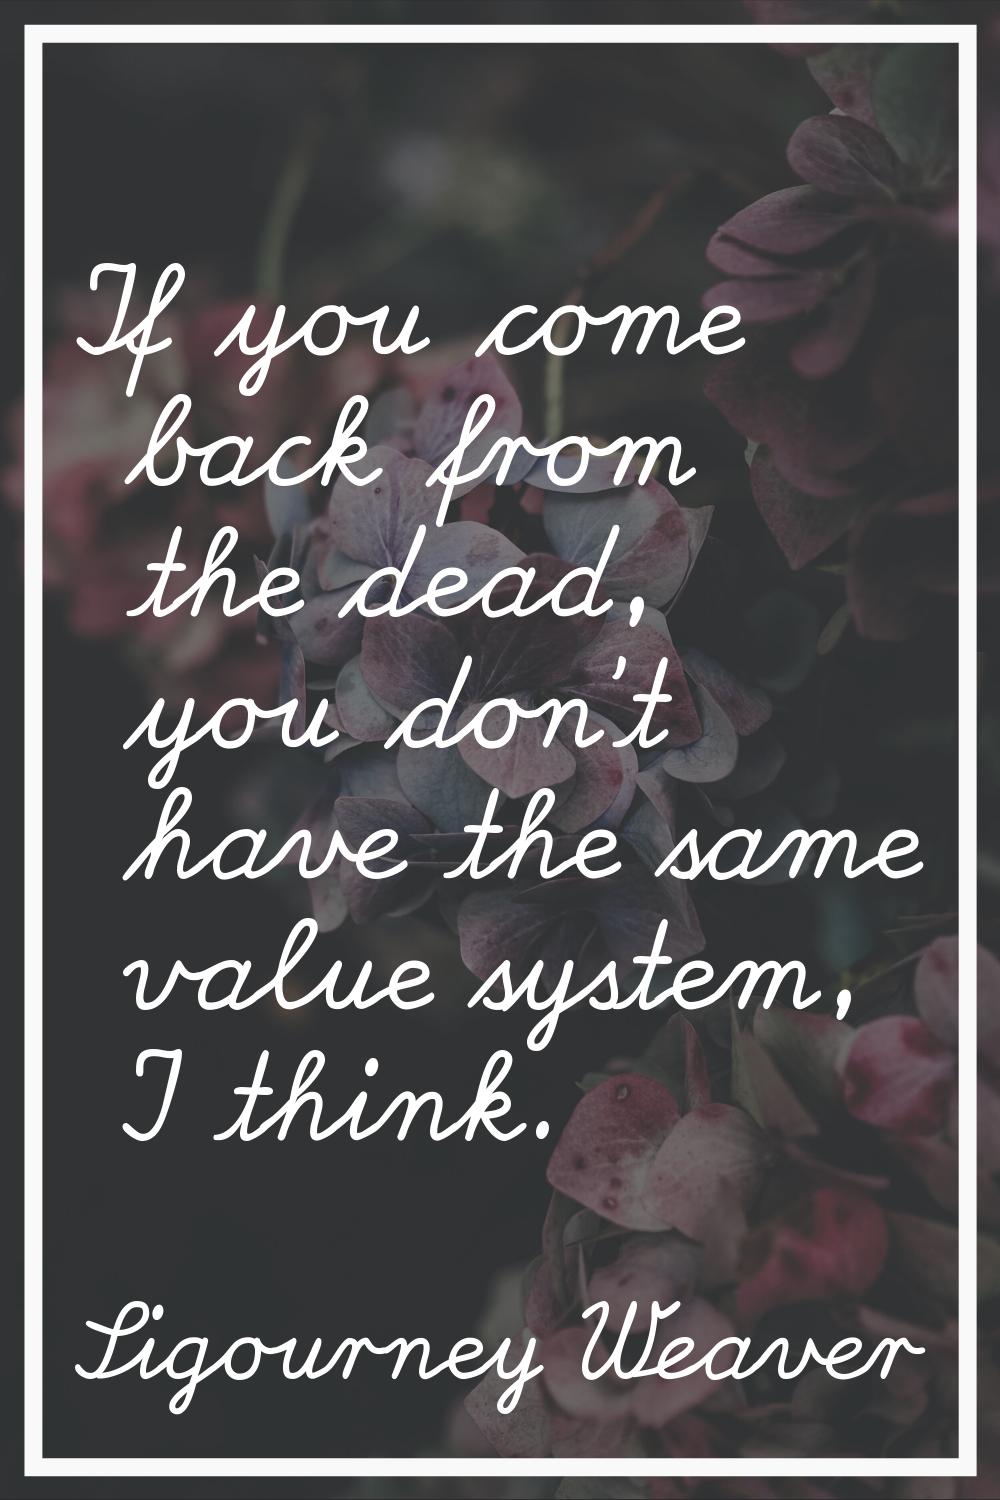 If you come back from the dead, you don't have the same value system, I think.